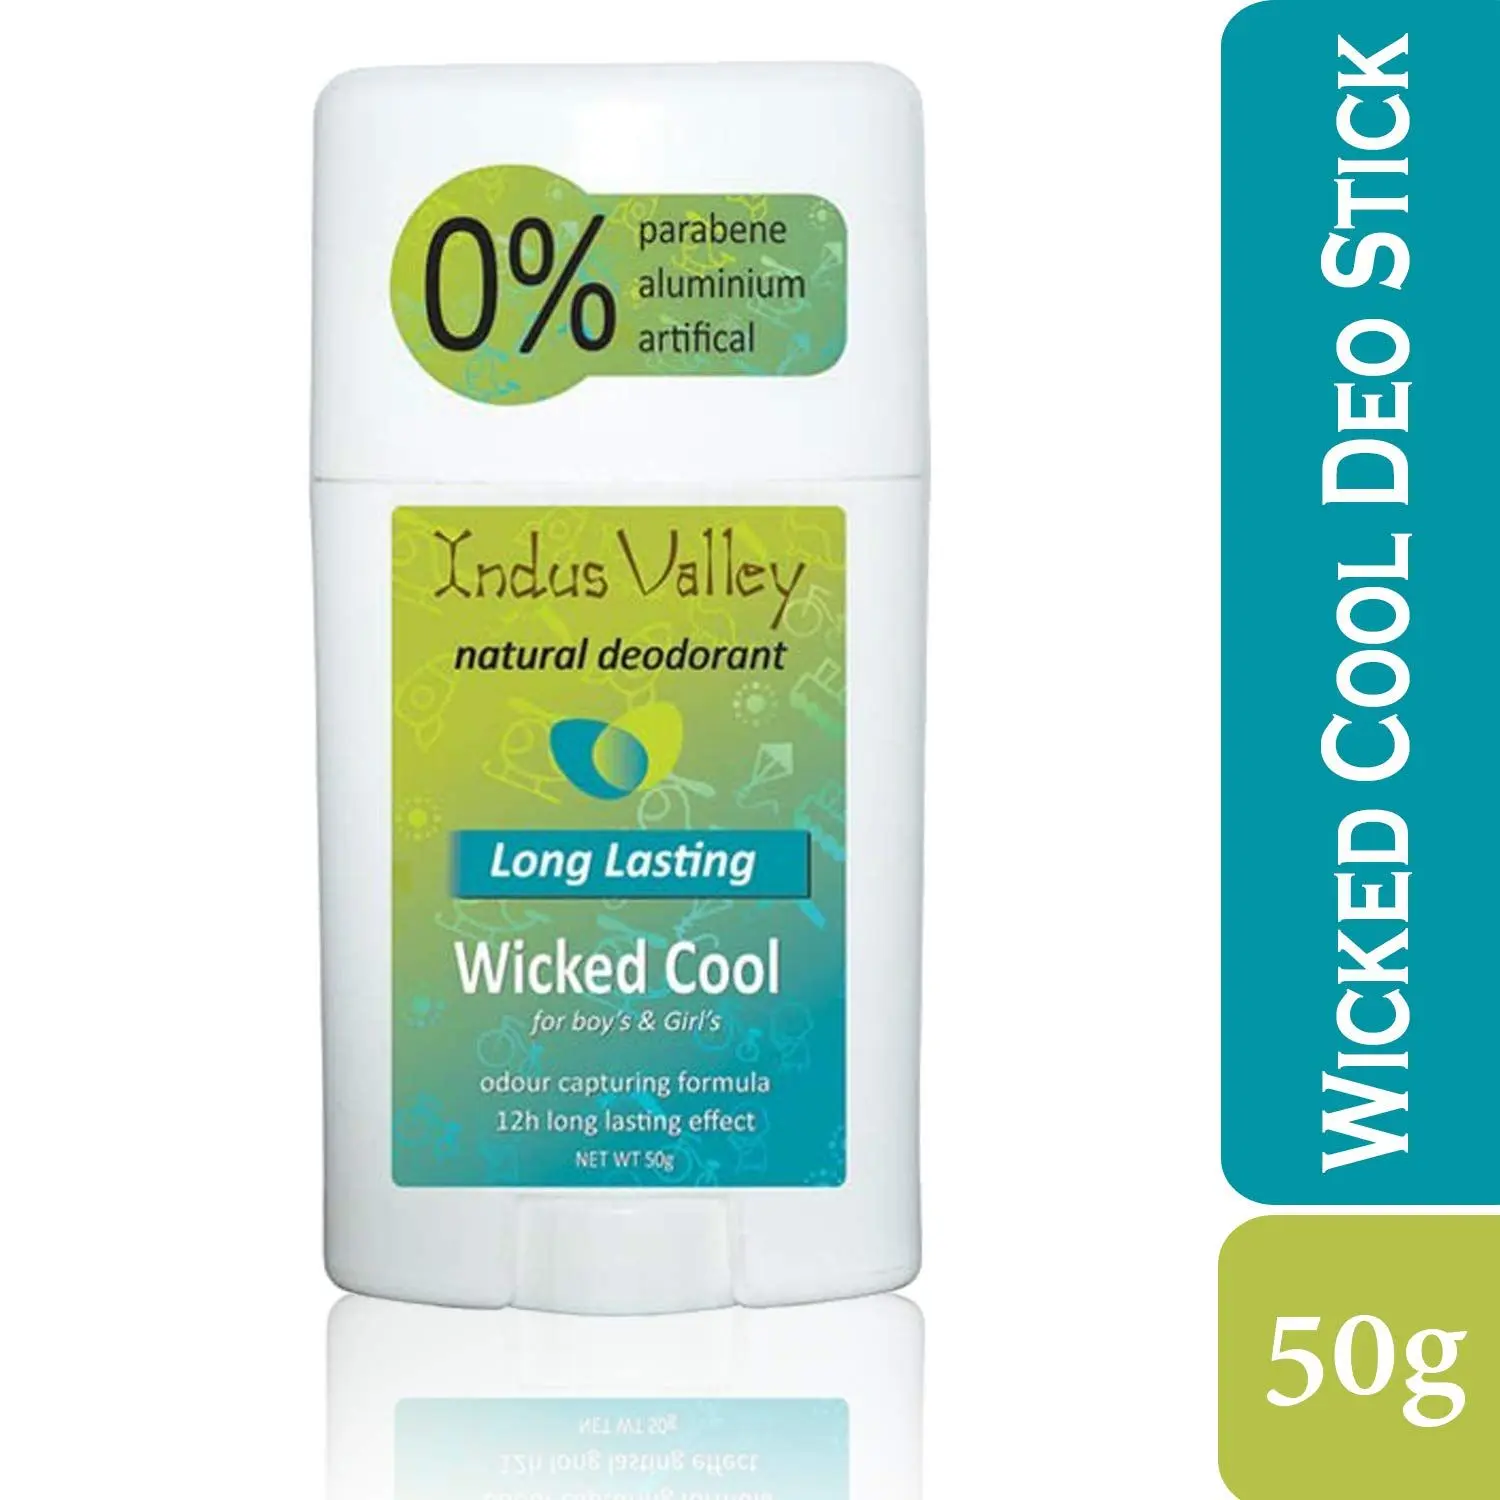 Indus Valley Wicked Cool Alcohol Free Aluminium Free Daily use Deodorant Stick with Long Lasting Effect